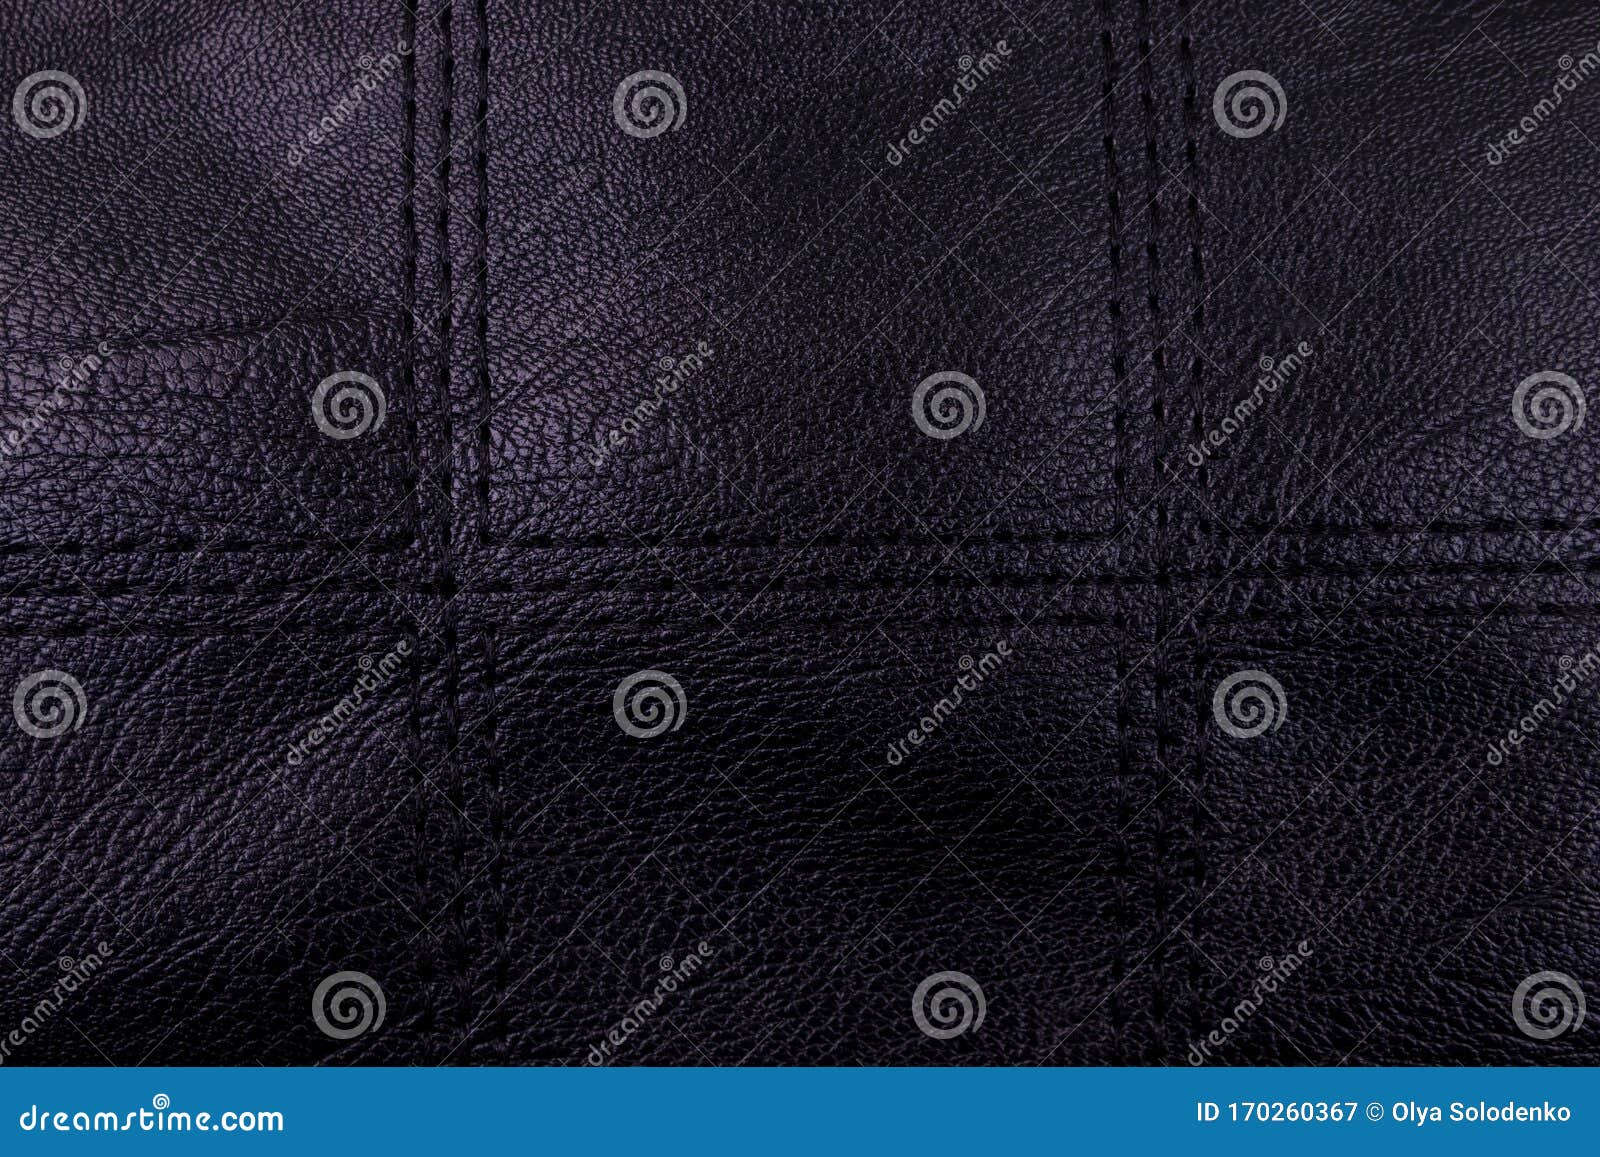 Black Leather Texture Background Stock Image - Image of banner, luxury ...